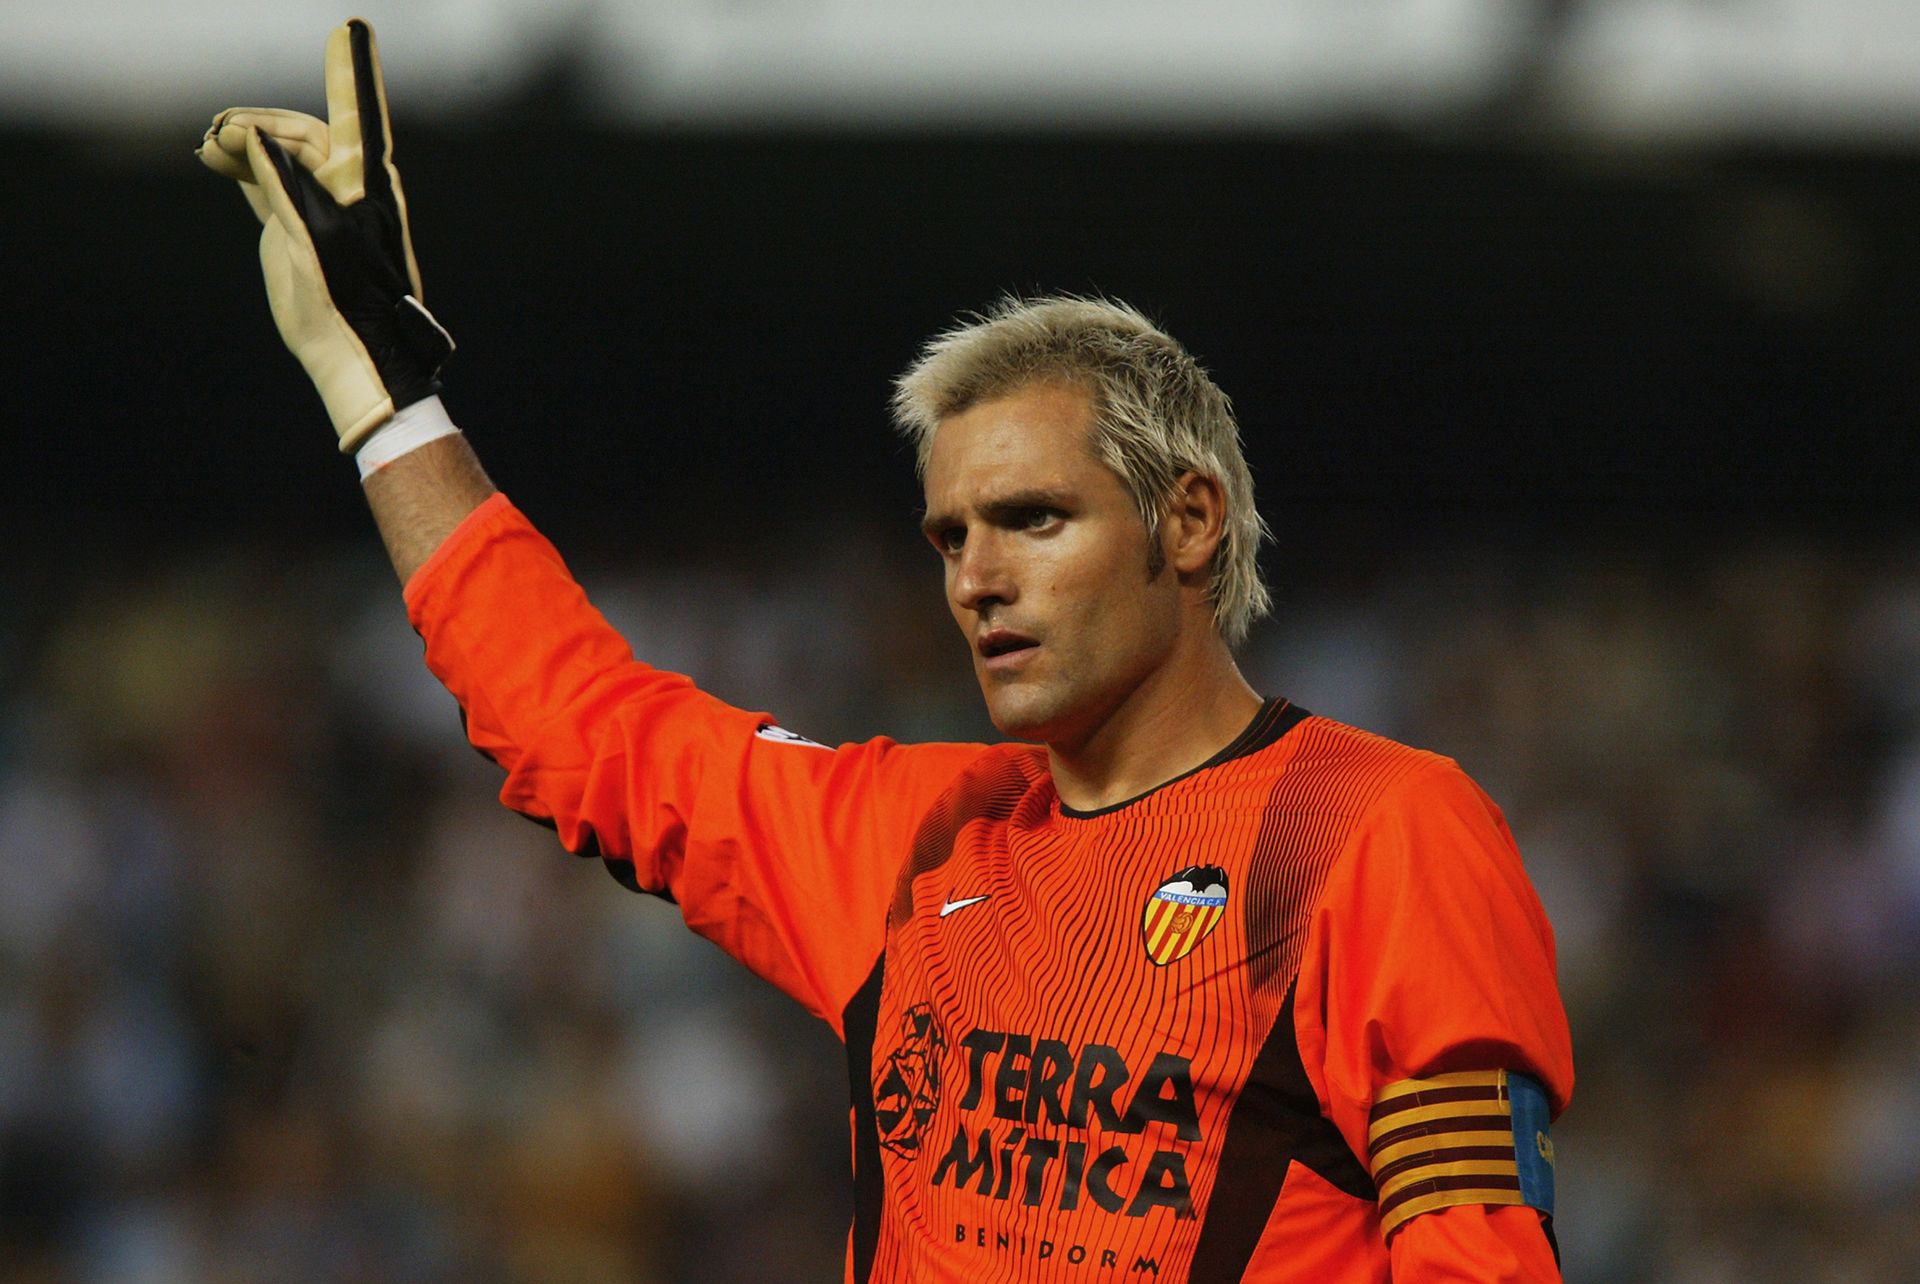 <p>                     Santiago Cañizares was Valencia's goalkeeper for a decade between 1998 and 2008 and a key part of the club's success in that era.                   </p>                                      <p>                     Described as the best goalkeeper in the world by Peter Schmeichel in 2004, Cañizares won two La Liga titles with Valencia in the early 2000s and played in back-to-back Champions League finals in 2000 and 2001. He also won 46 caps for Spain.                   </p>